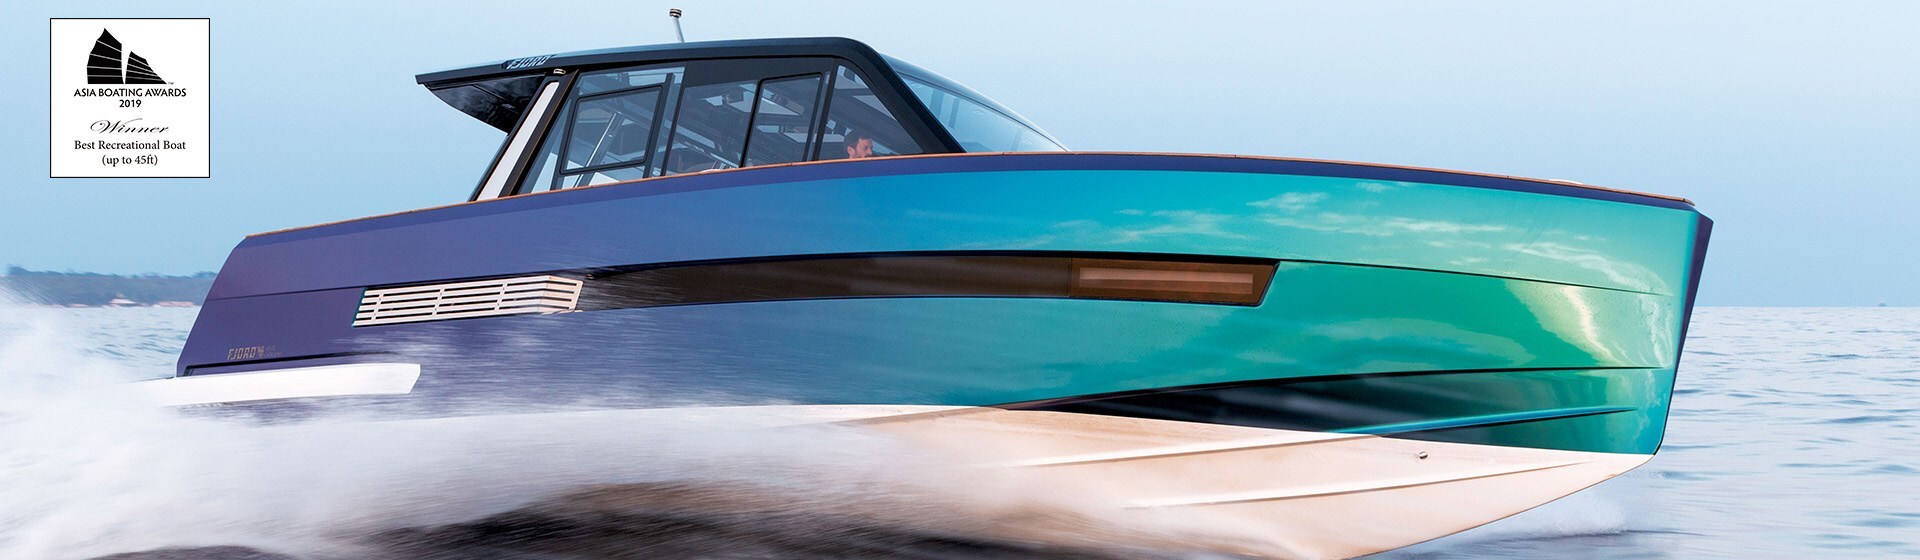 Majestic colored high-performance powerboat with deck cabin going fast